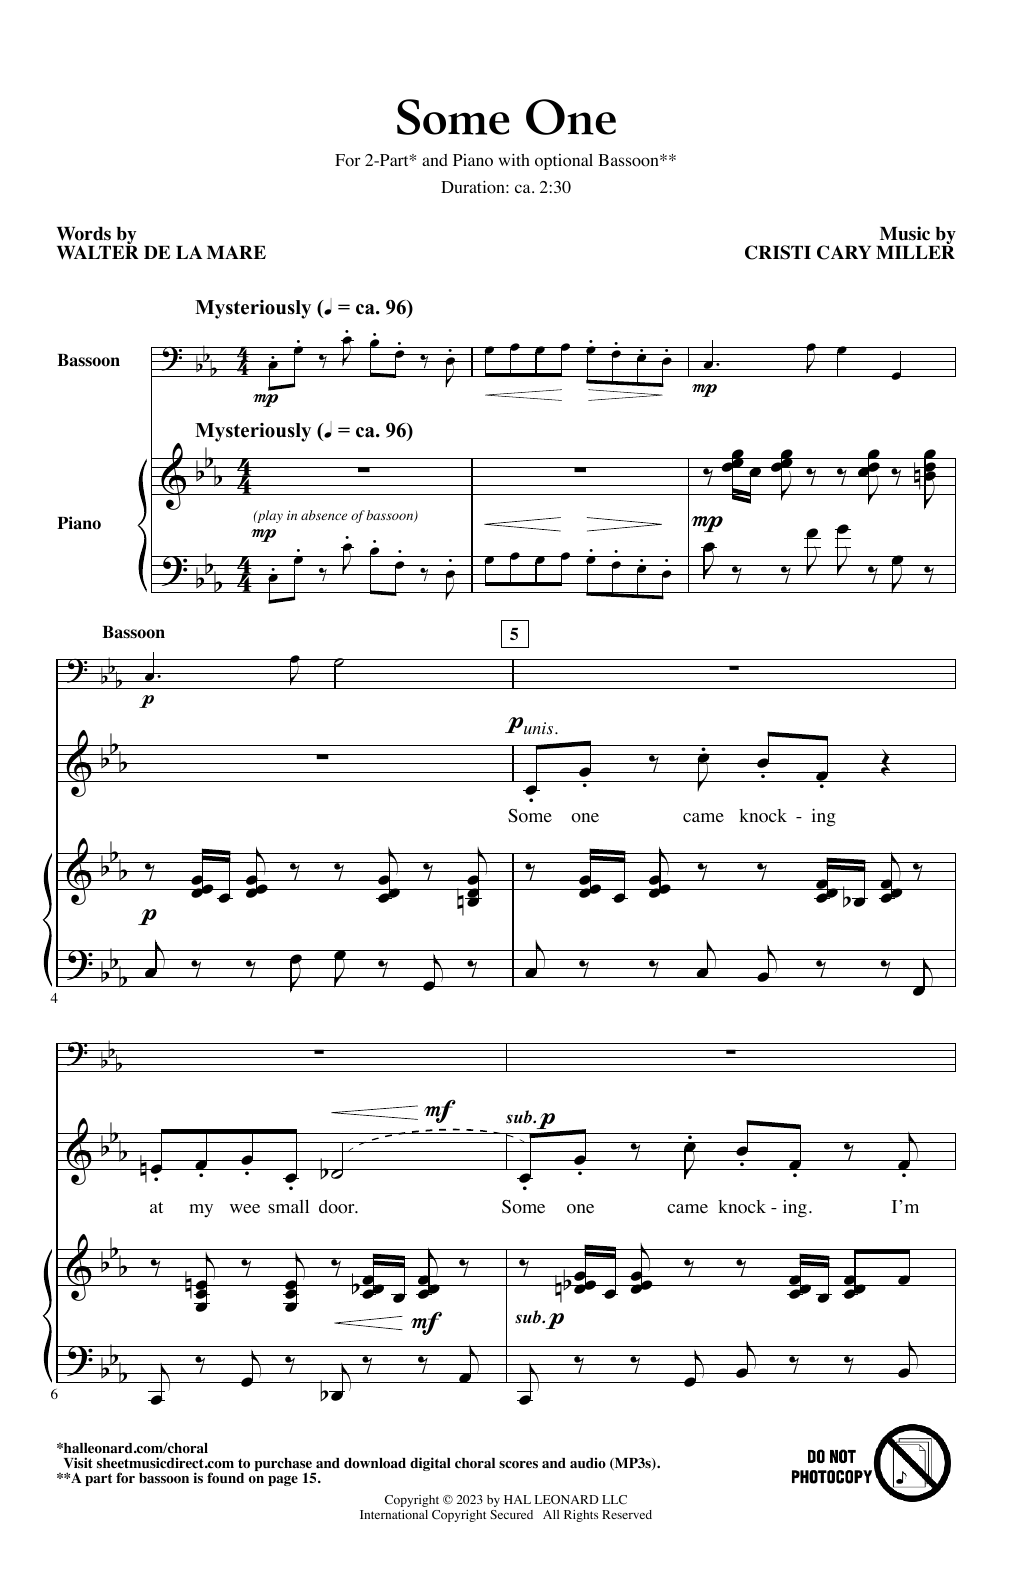 Download Cristi Cary Miller Some One Sheet Music